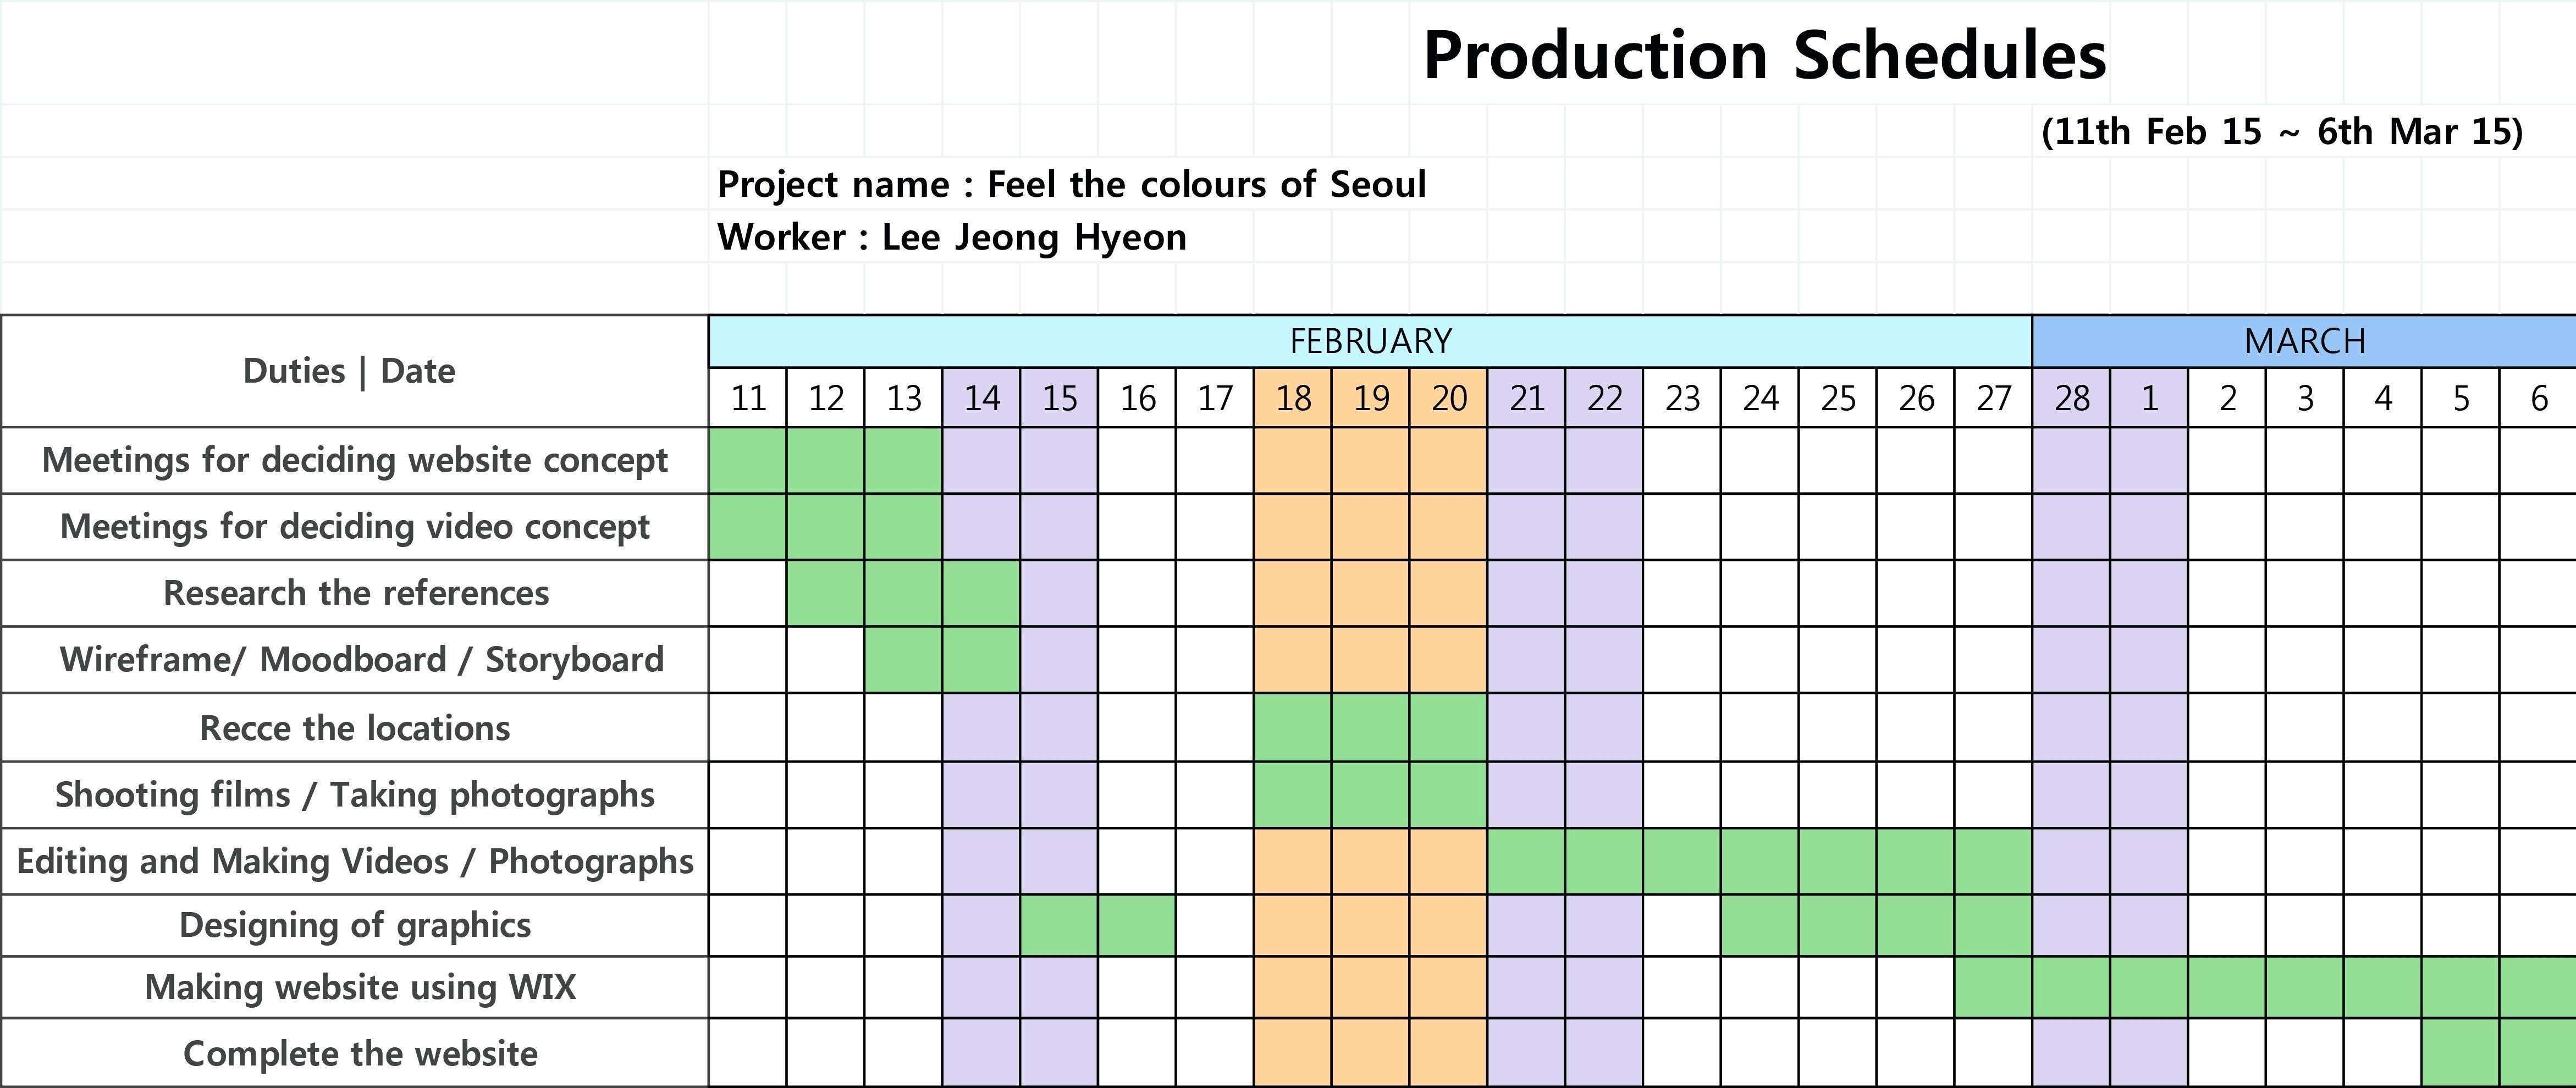 Master Production Schedule Template